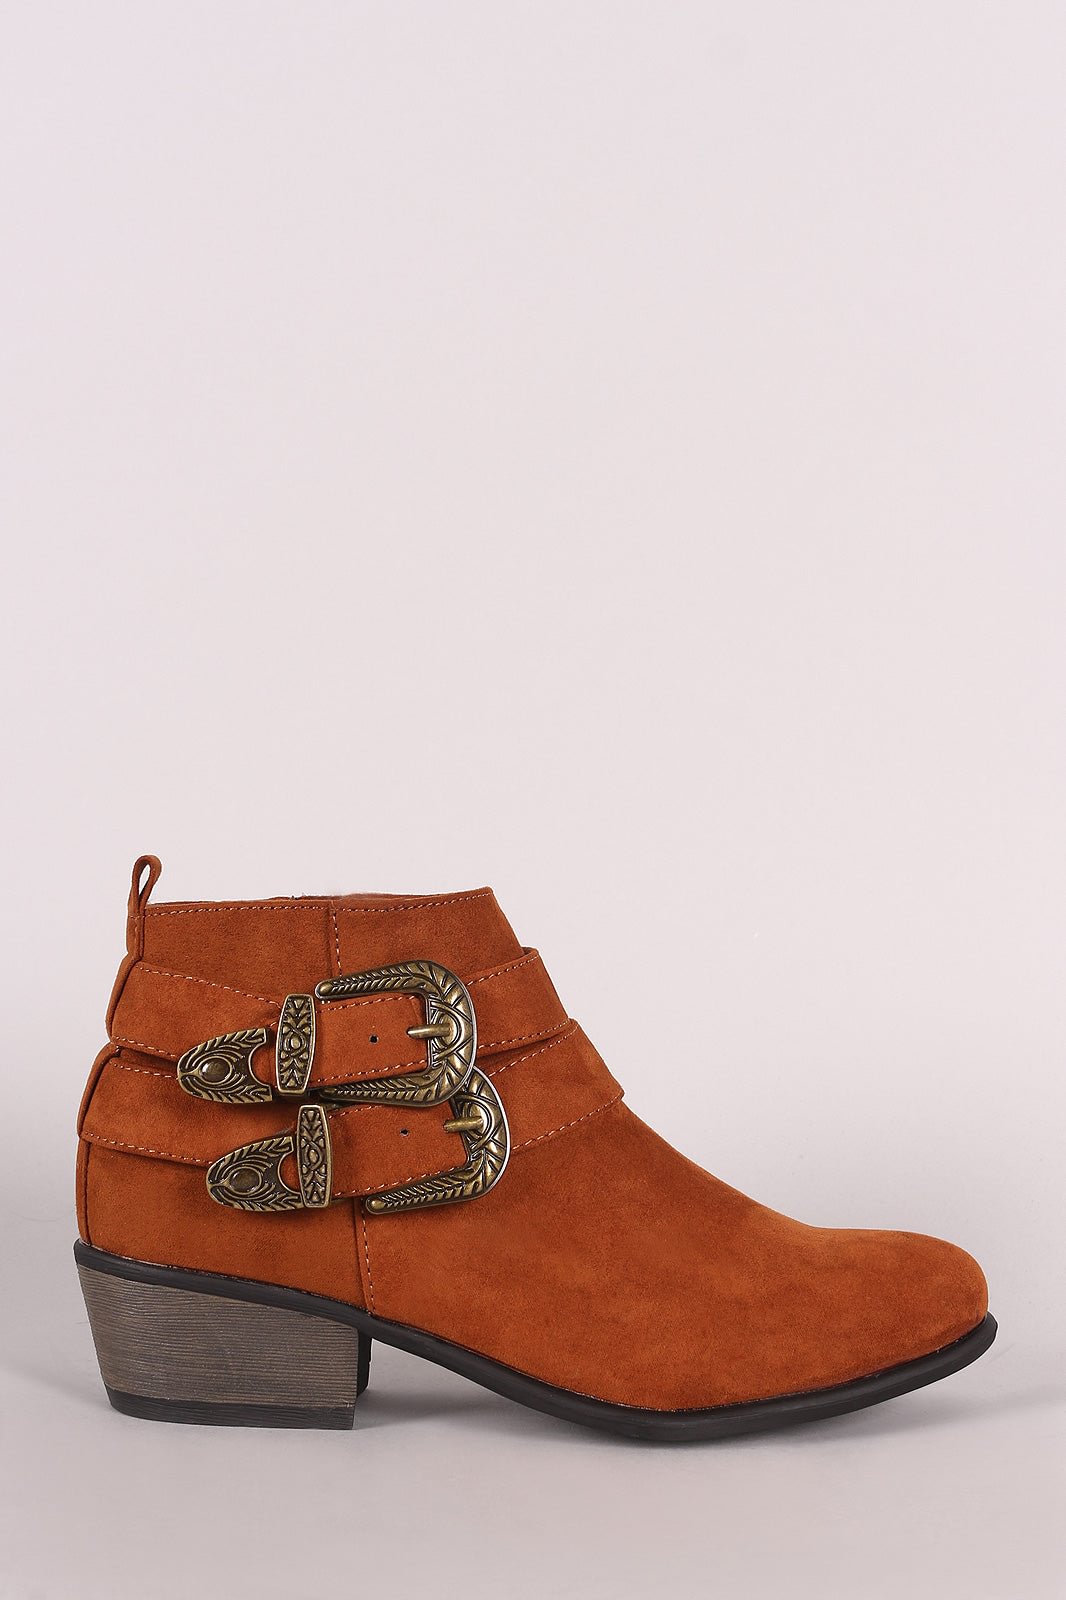 Bamboo Suede Almond Toe Etched Buckled Ankle Booties